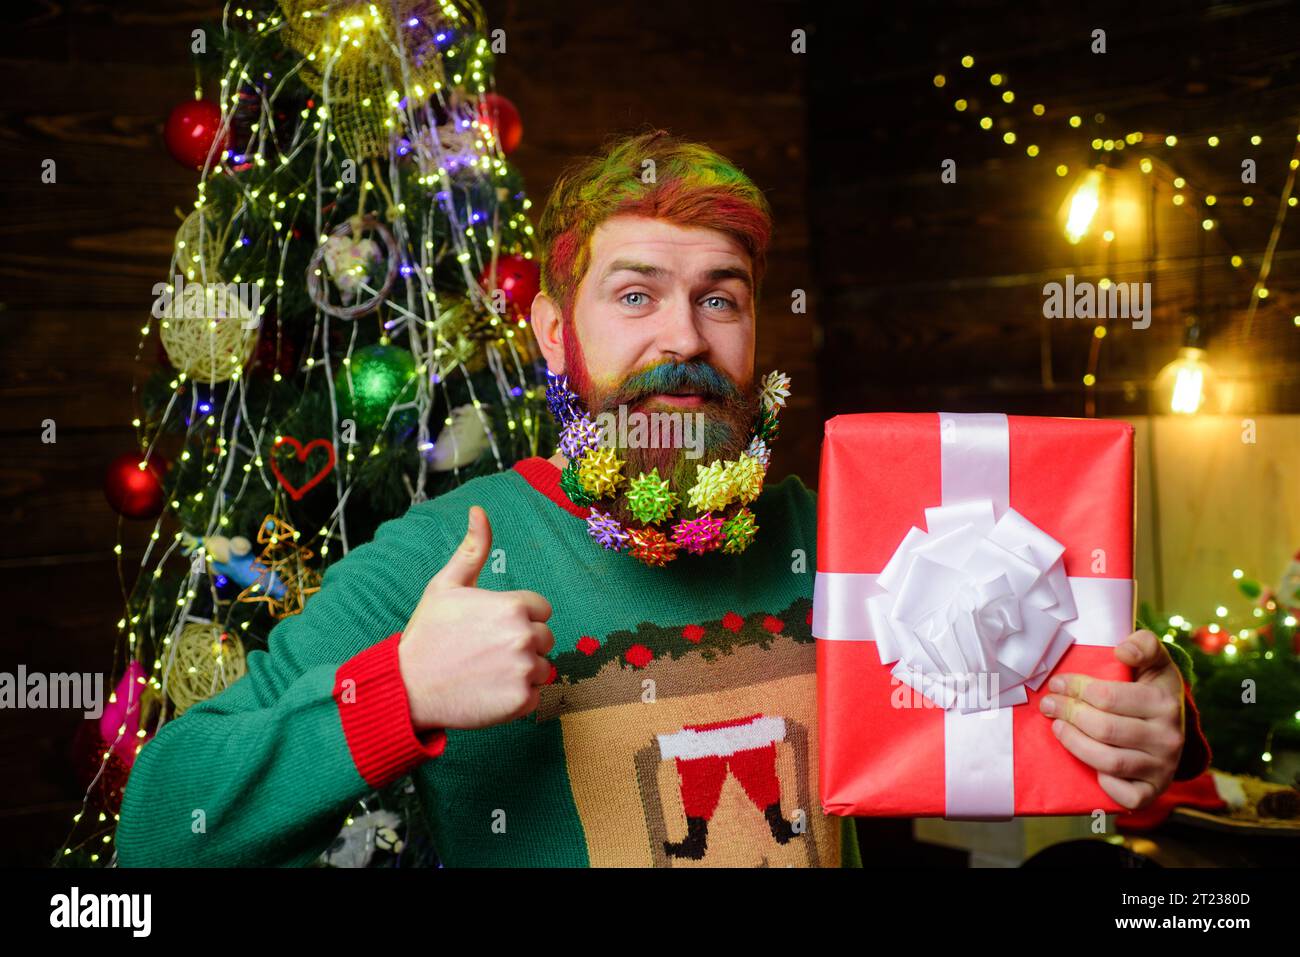 Smiling bearded man with decorated Christmas beard hold Christmas present shows thumb up. Christmas beard decorations. Delivery service. Happy New Stock Photo